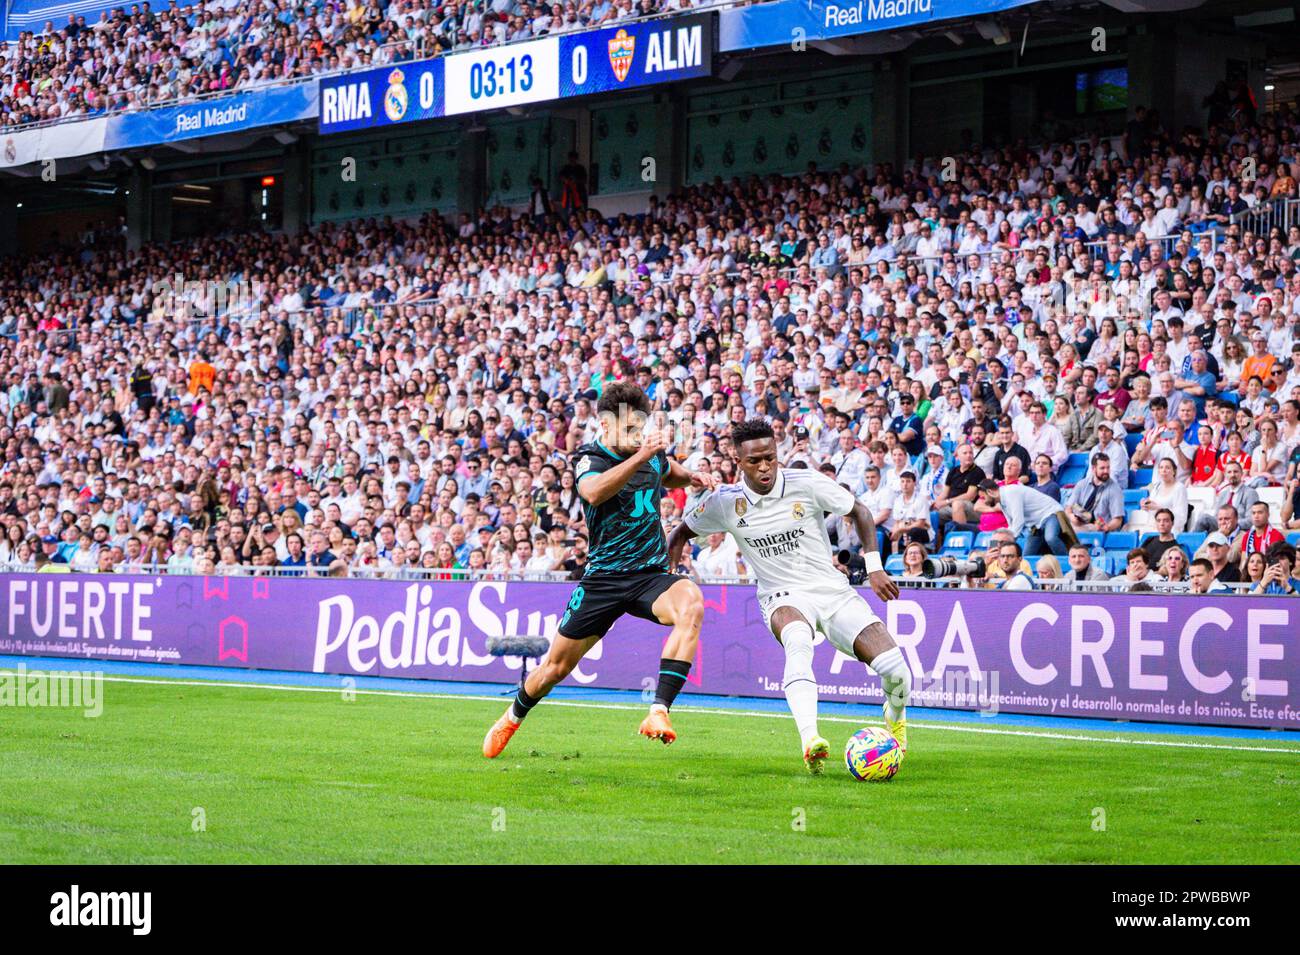 Mardrid, Spain. 29th Apr, 2023. Vinicius Junior (Real Madrid) in action  during the football match between&#xA;Real Madrid and Almeria&#xA;valid for  the match day 32 of the Spanish first division league “La Liga”